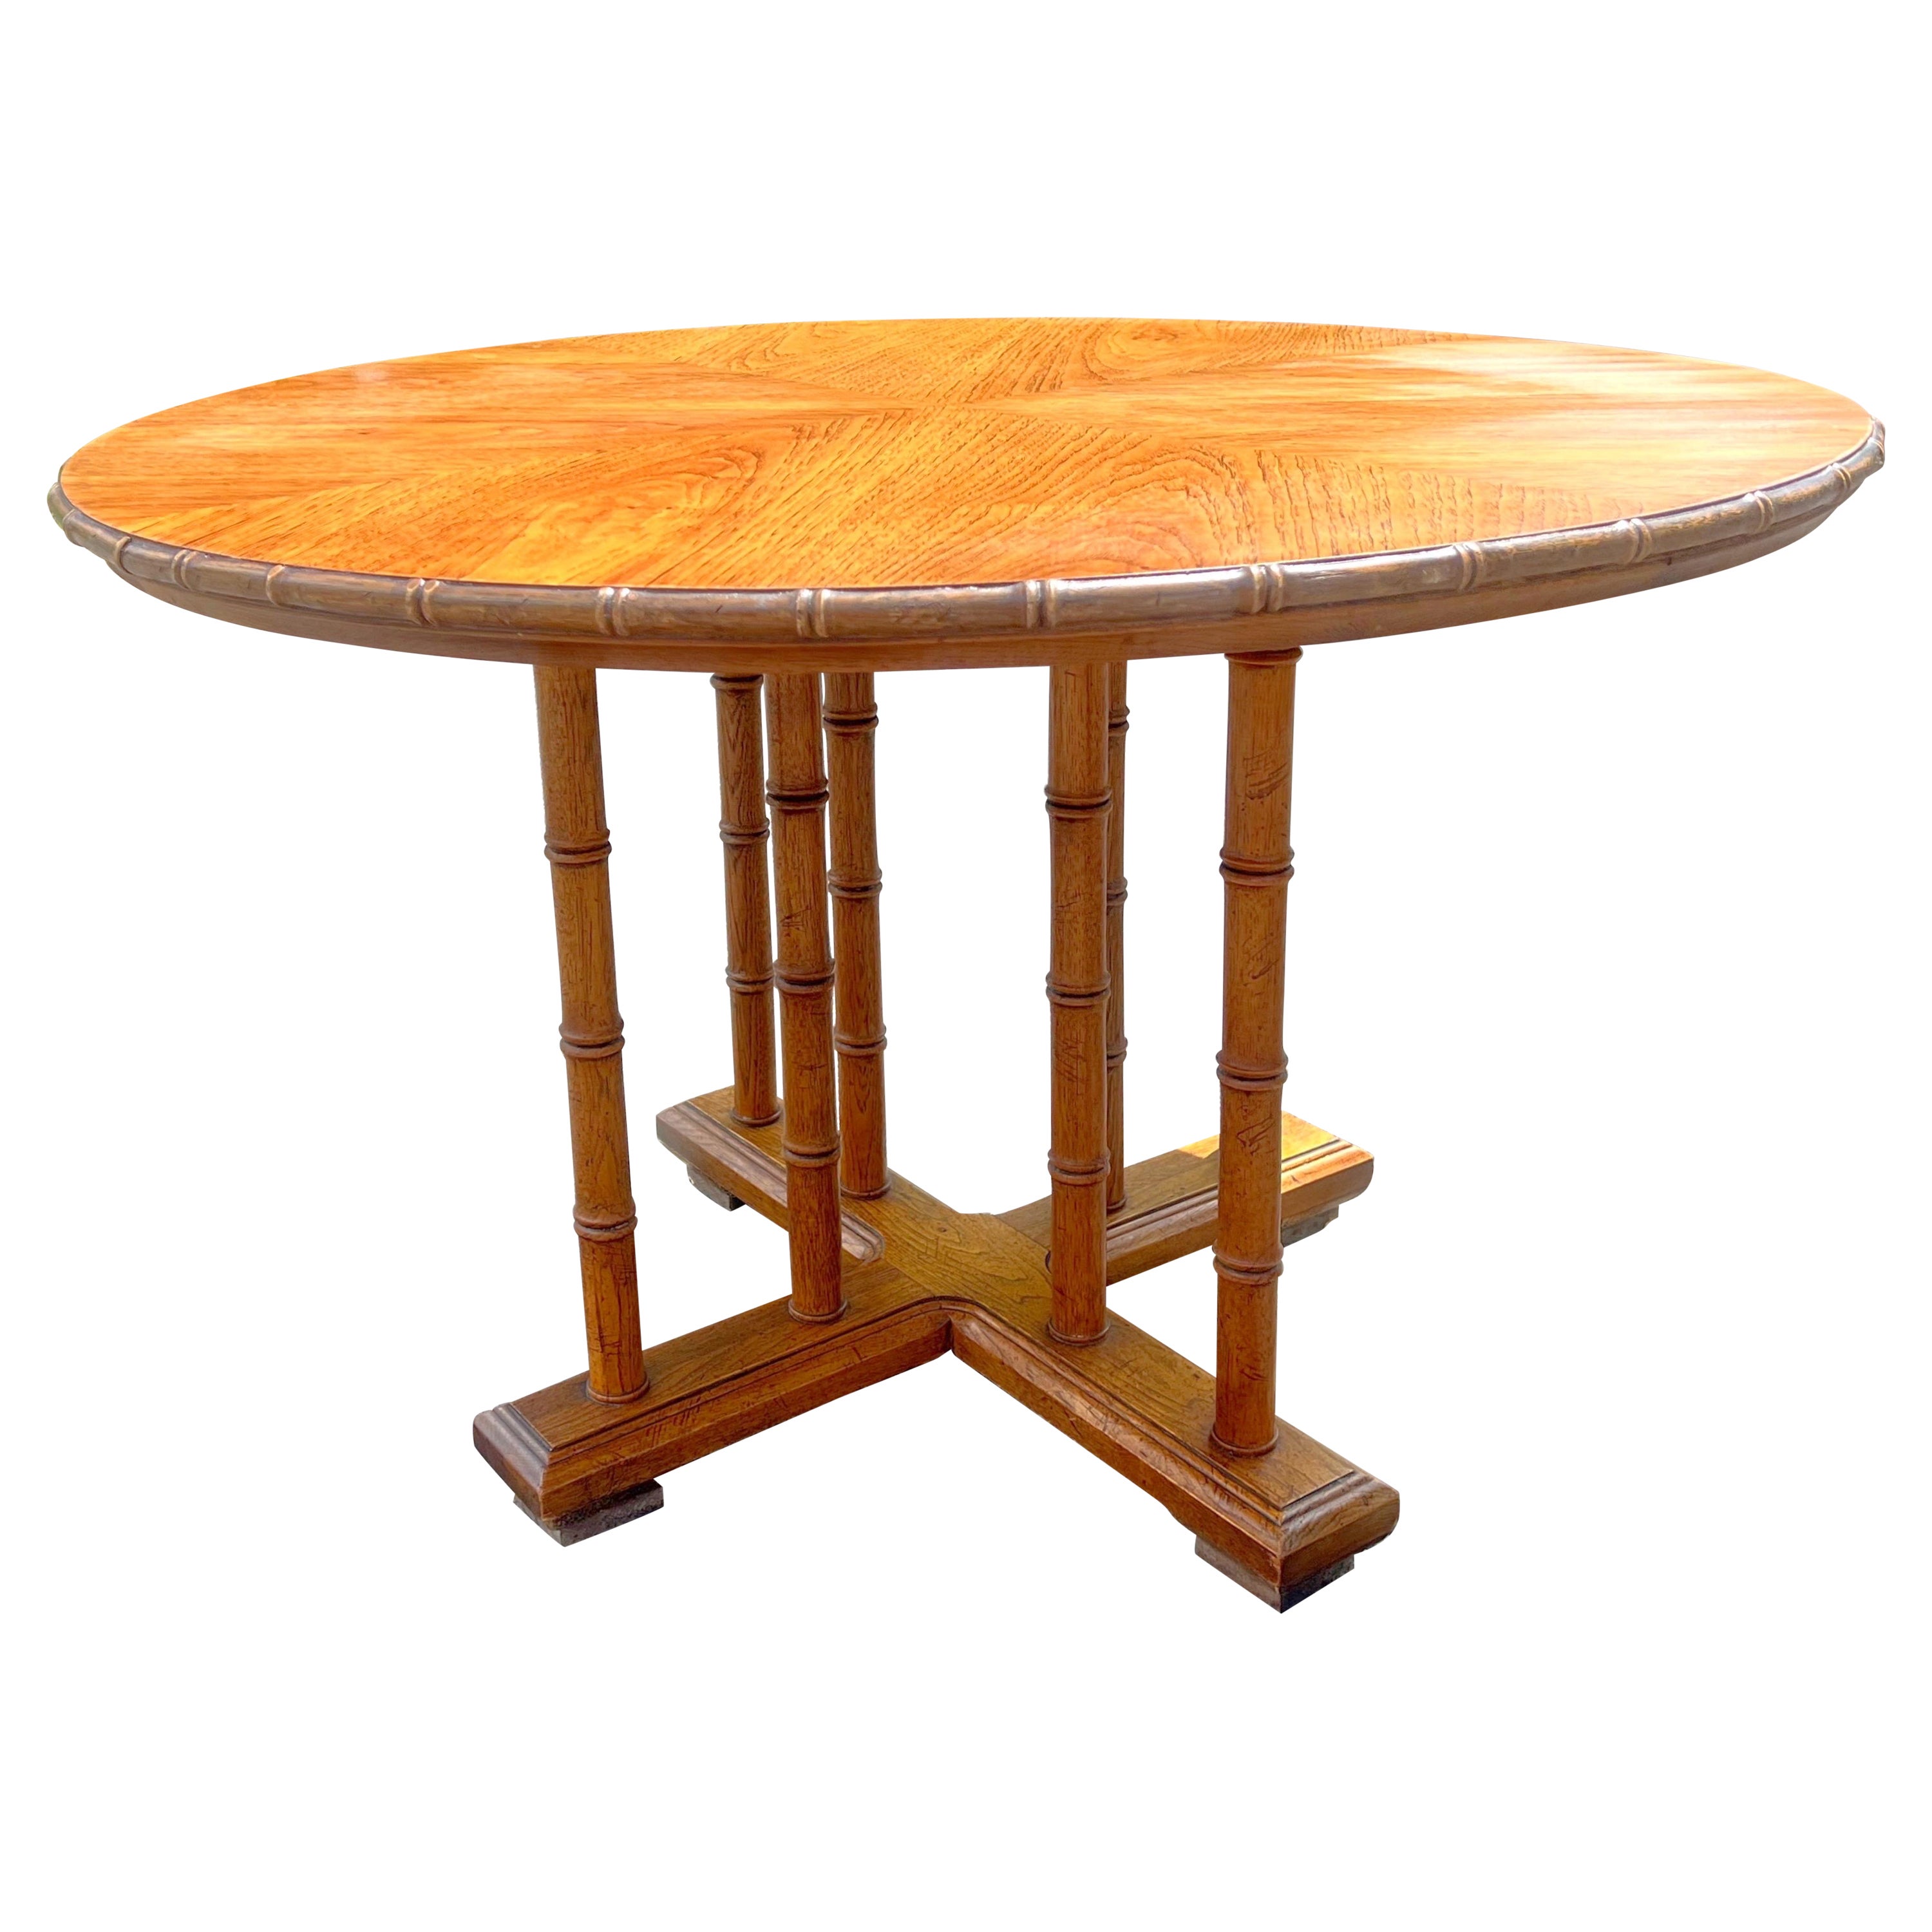 1960s Palm Beach Regency Bamboo Round Dining Table For Sale